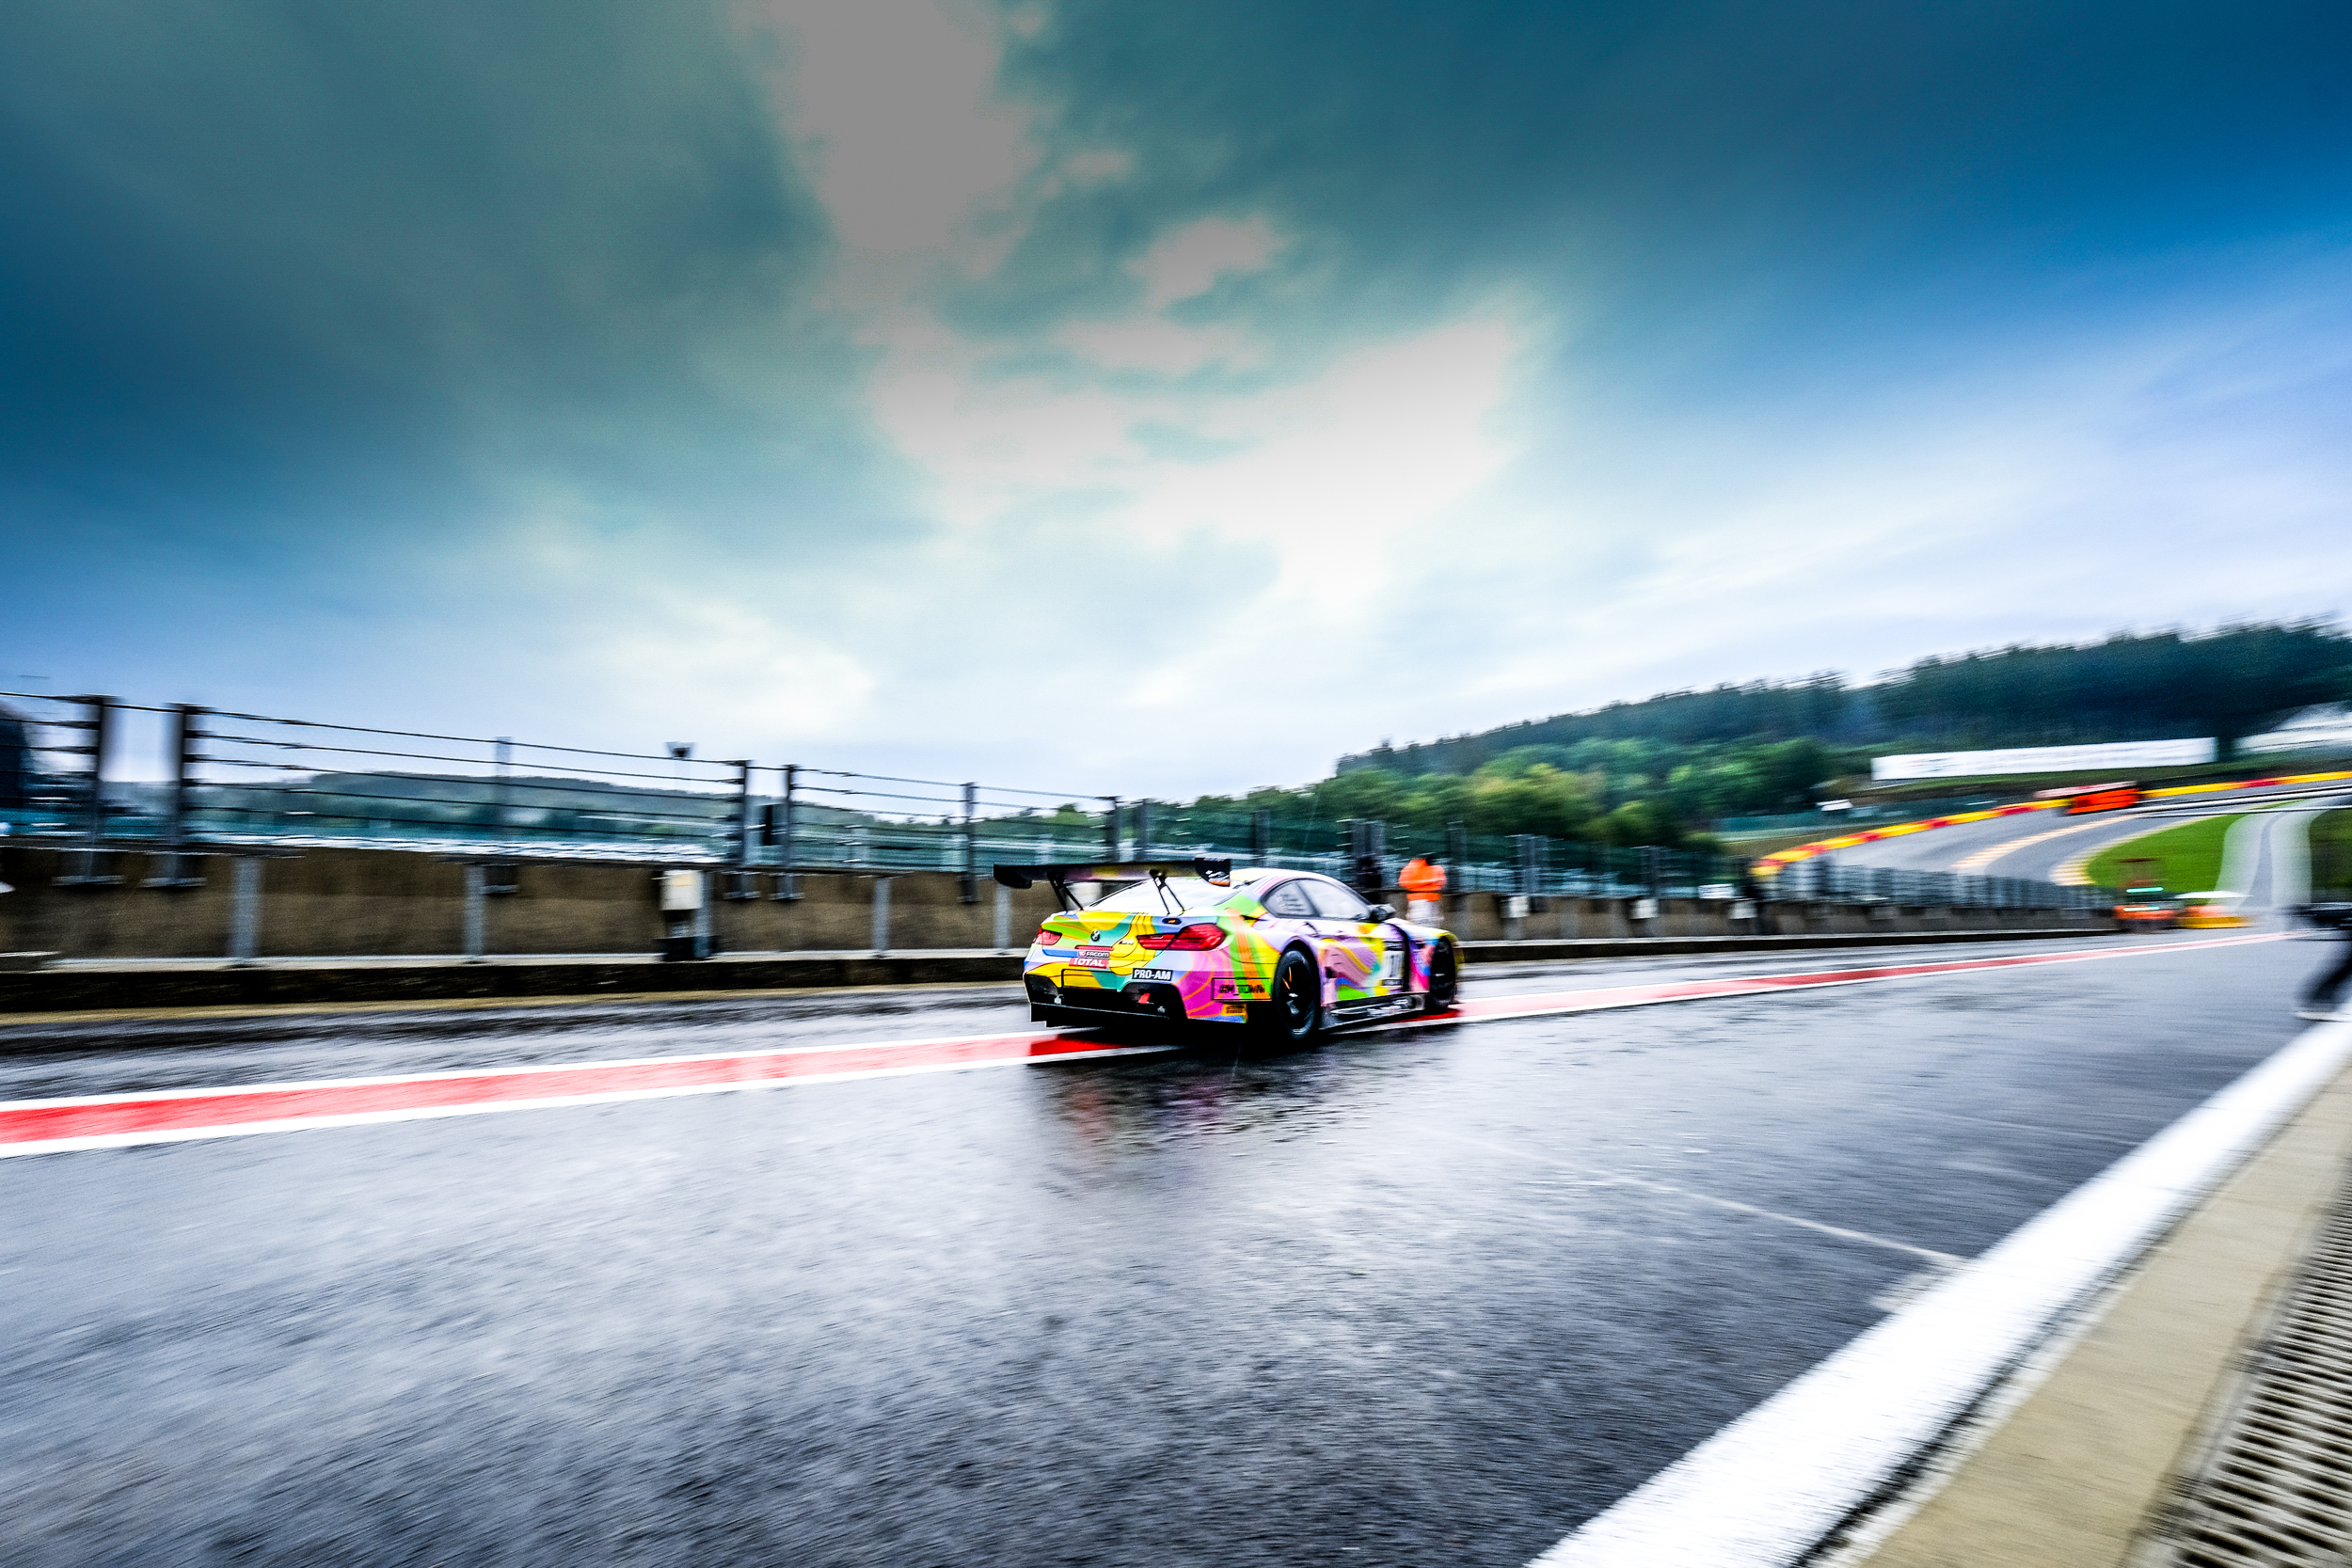 SpaFrancorchamps comes alive as Total 24 Hours of Spa test days get